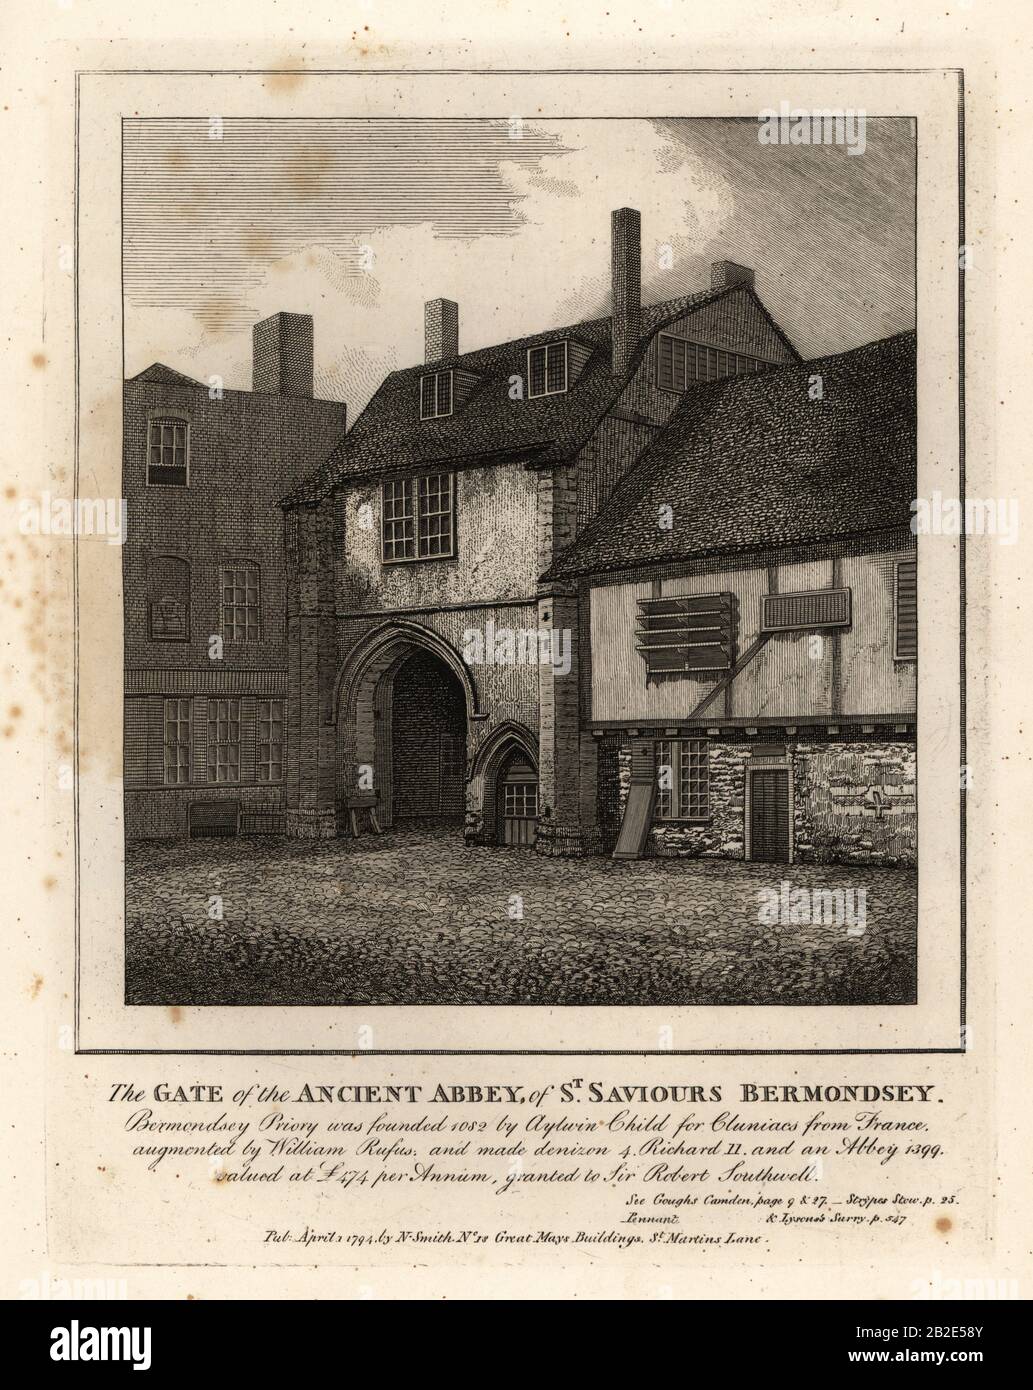 The Gate of the Ancient Abbey of St. Saviours Bermondsey. Founded 1082 by Aylwin Child for Cluniacs from France. Copperplate engraving by John Thomas Smith after original drawings by members of the Society of Antiquaries from his J.T. Smith’s Antiquities of London and its Environs, J. Sewell, R. Folder, J. Simco, London, 1794. Stock Photo